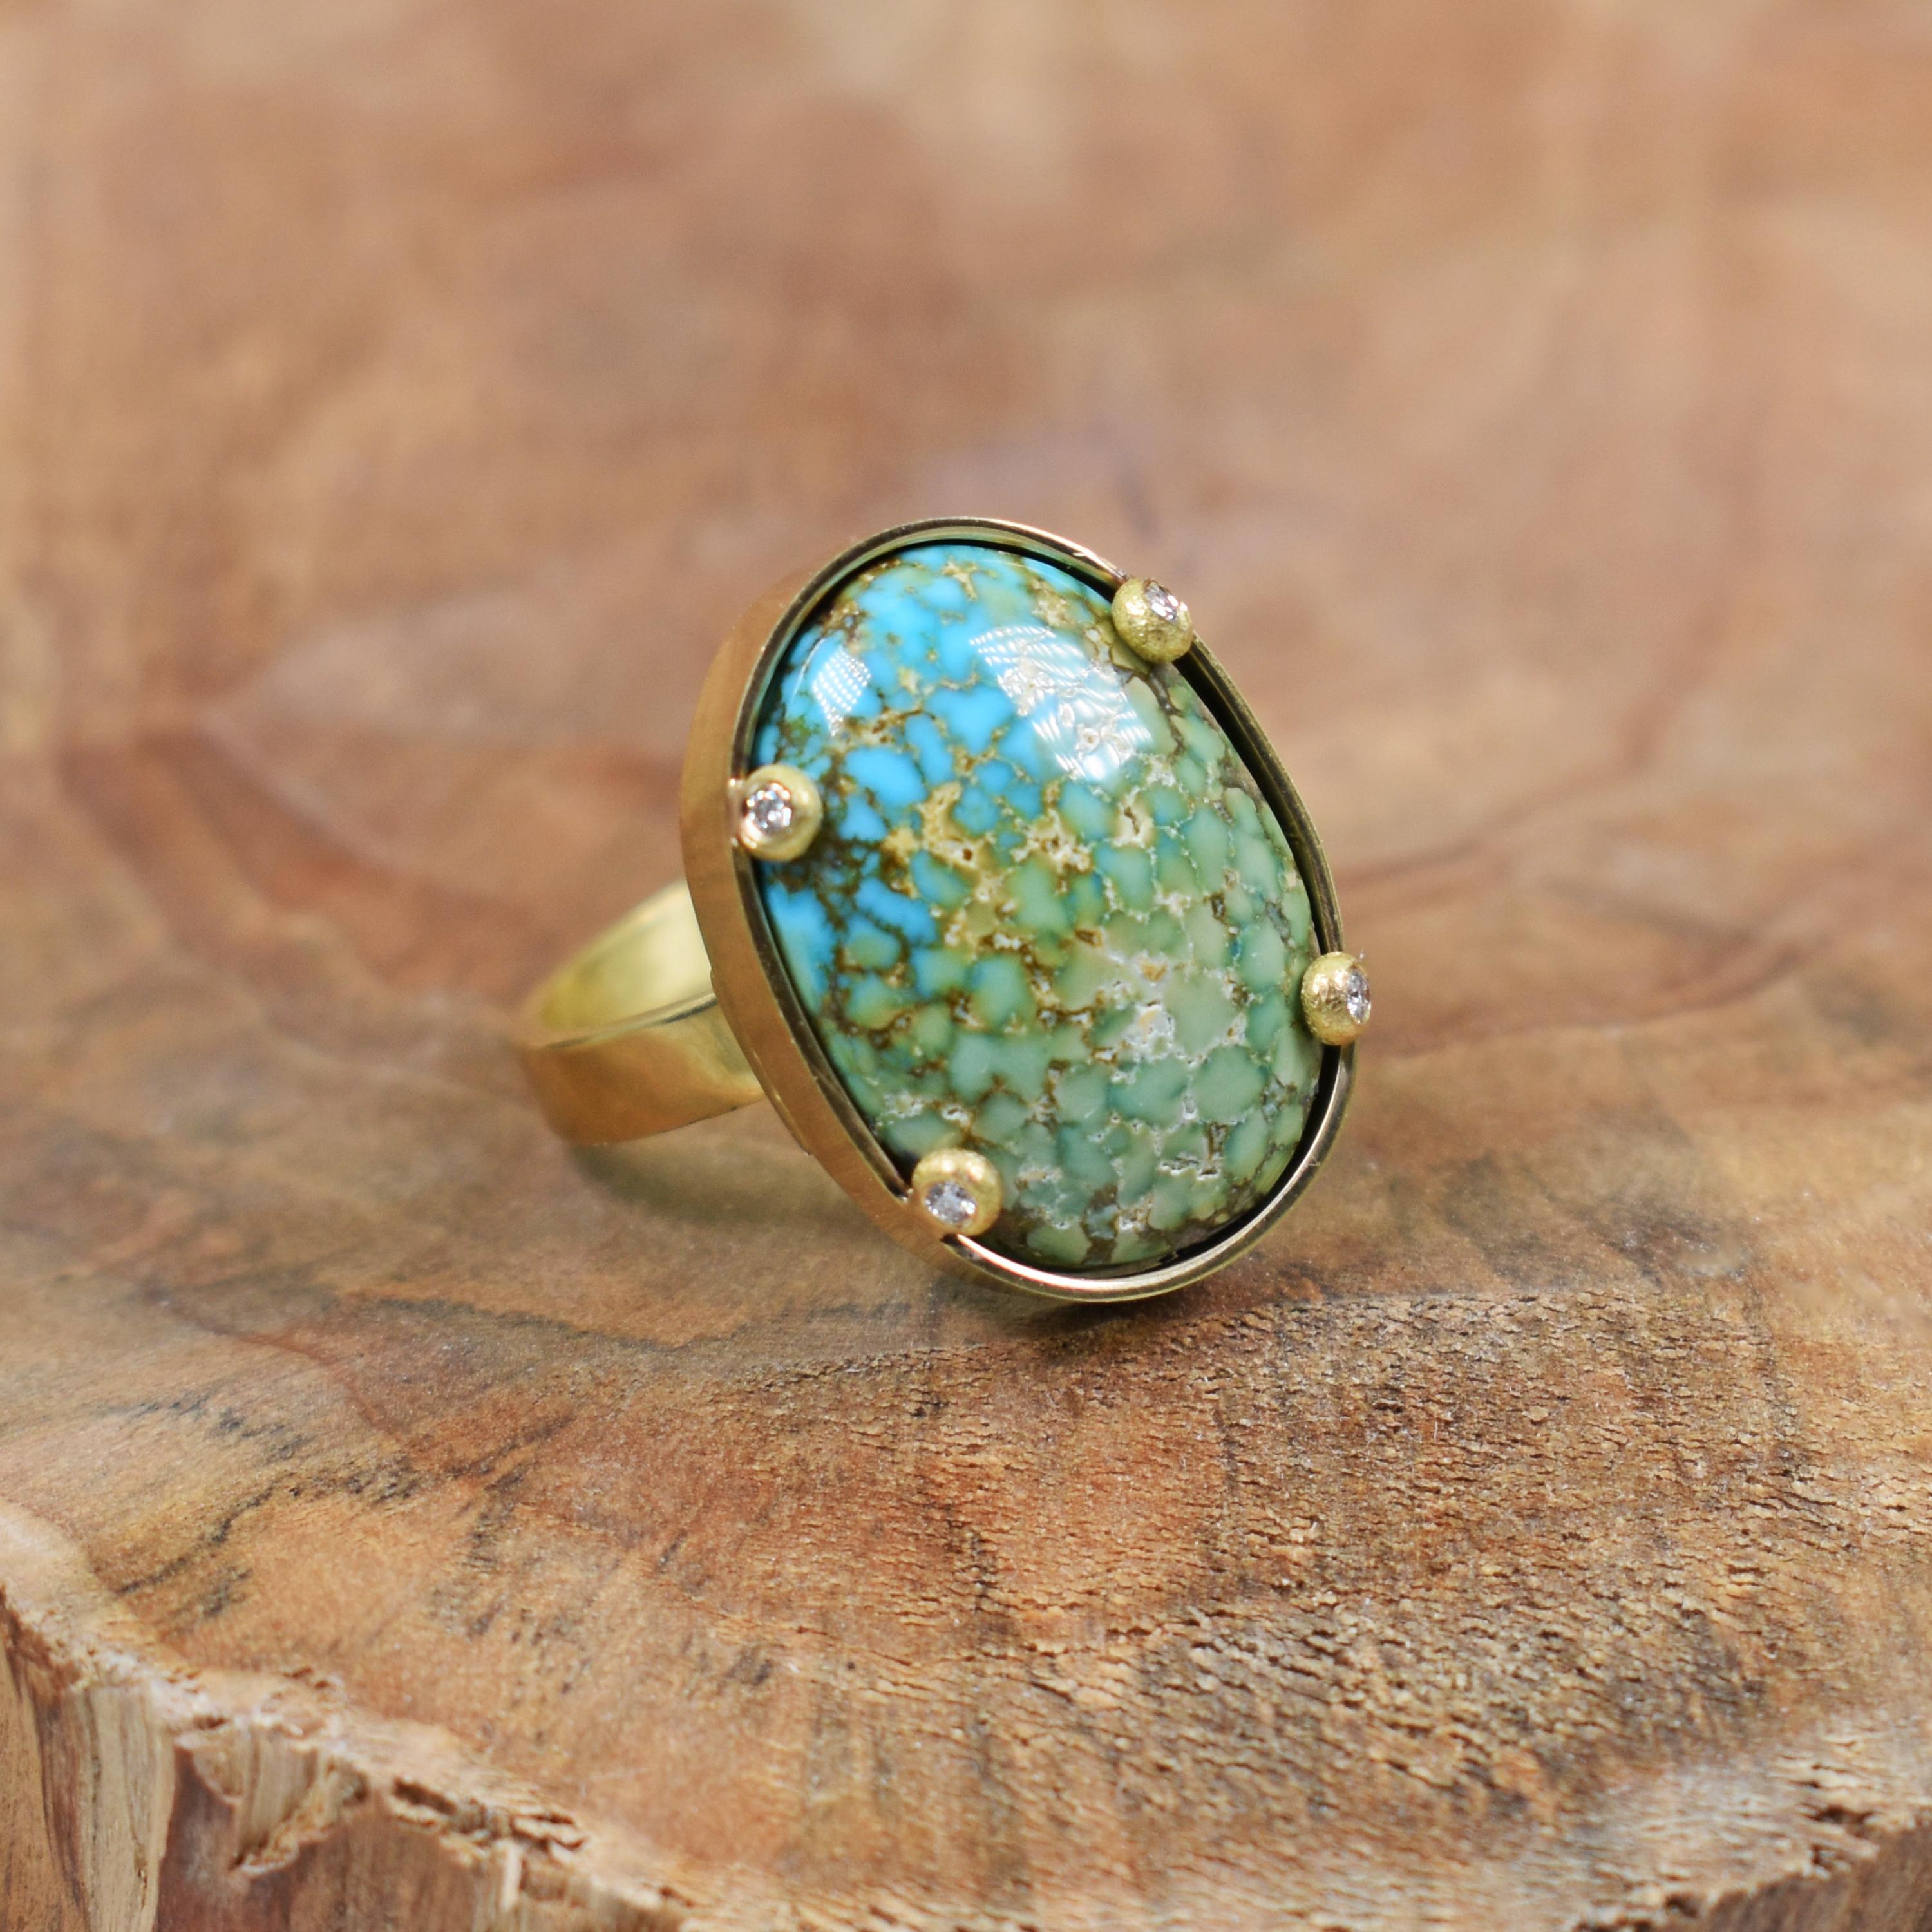 Beautiful 12 carat Turquoise Mountain Turquoise with 0.06 carats accent white diamonds set in 18k yellow gold handmade ring. Ring is size 6, and ring band is 3mm wide. Gorgeous Turquoise gemstone with rich yellow gold in this contemporary and